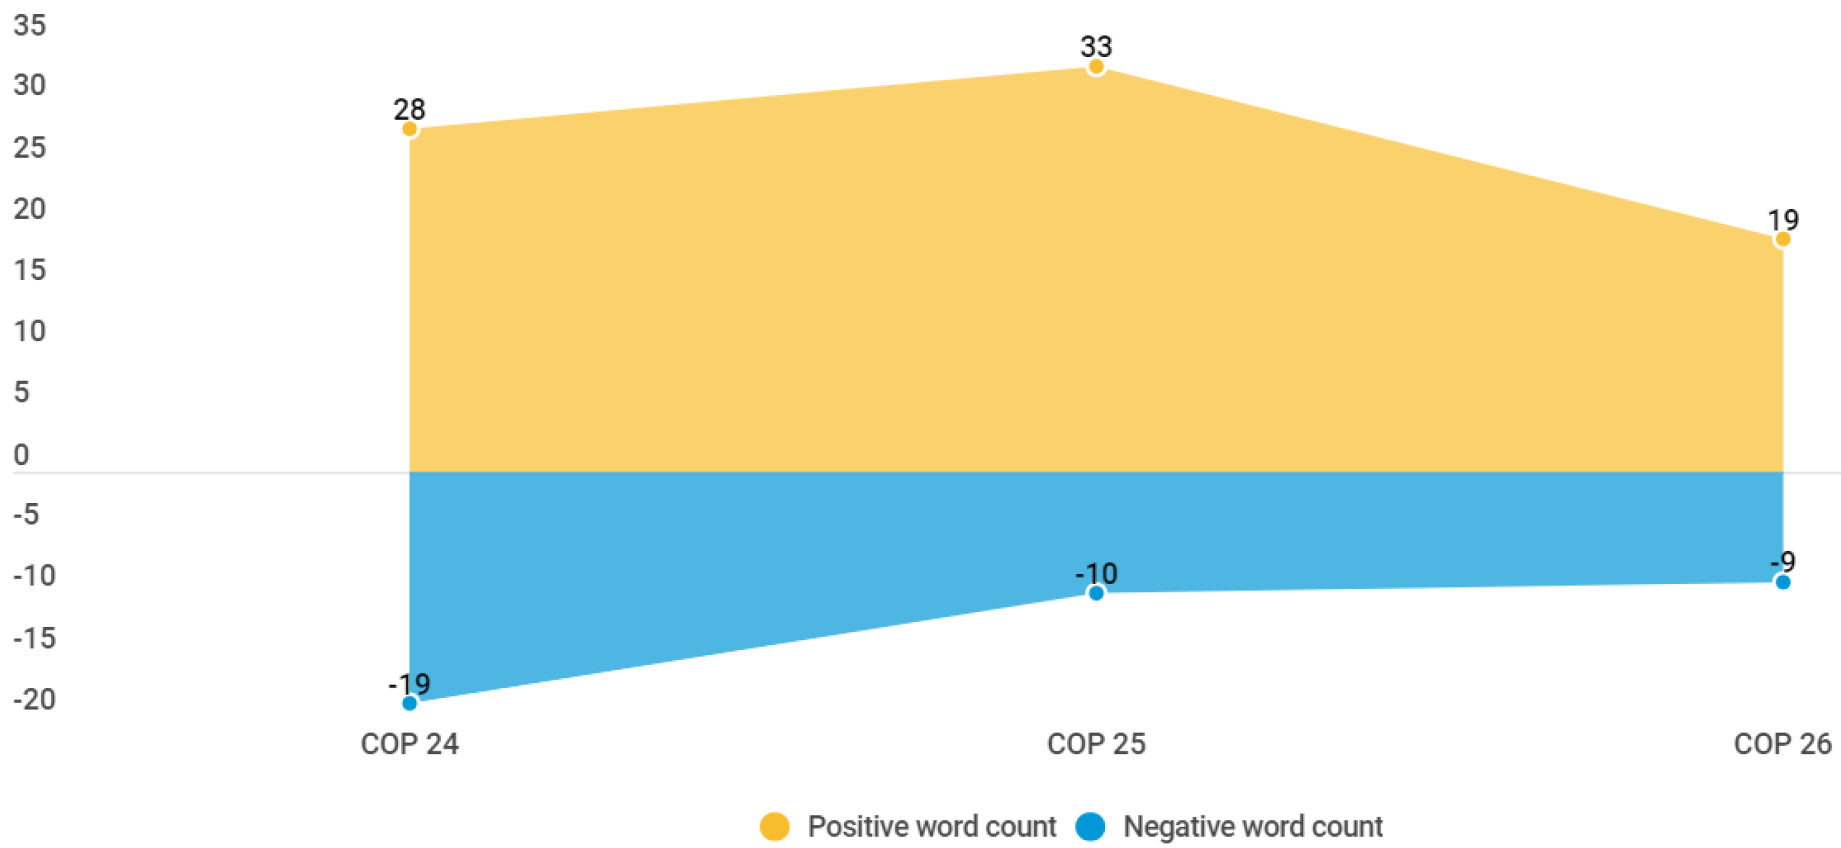 Usage of positive and negative connotations in COP24, COP25 and COP26 using sentiment analysis.